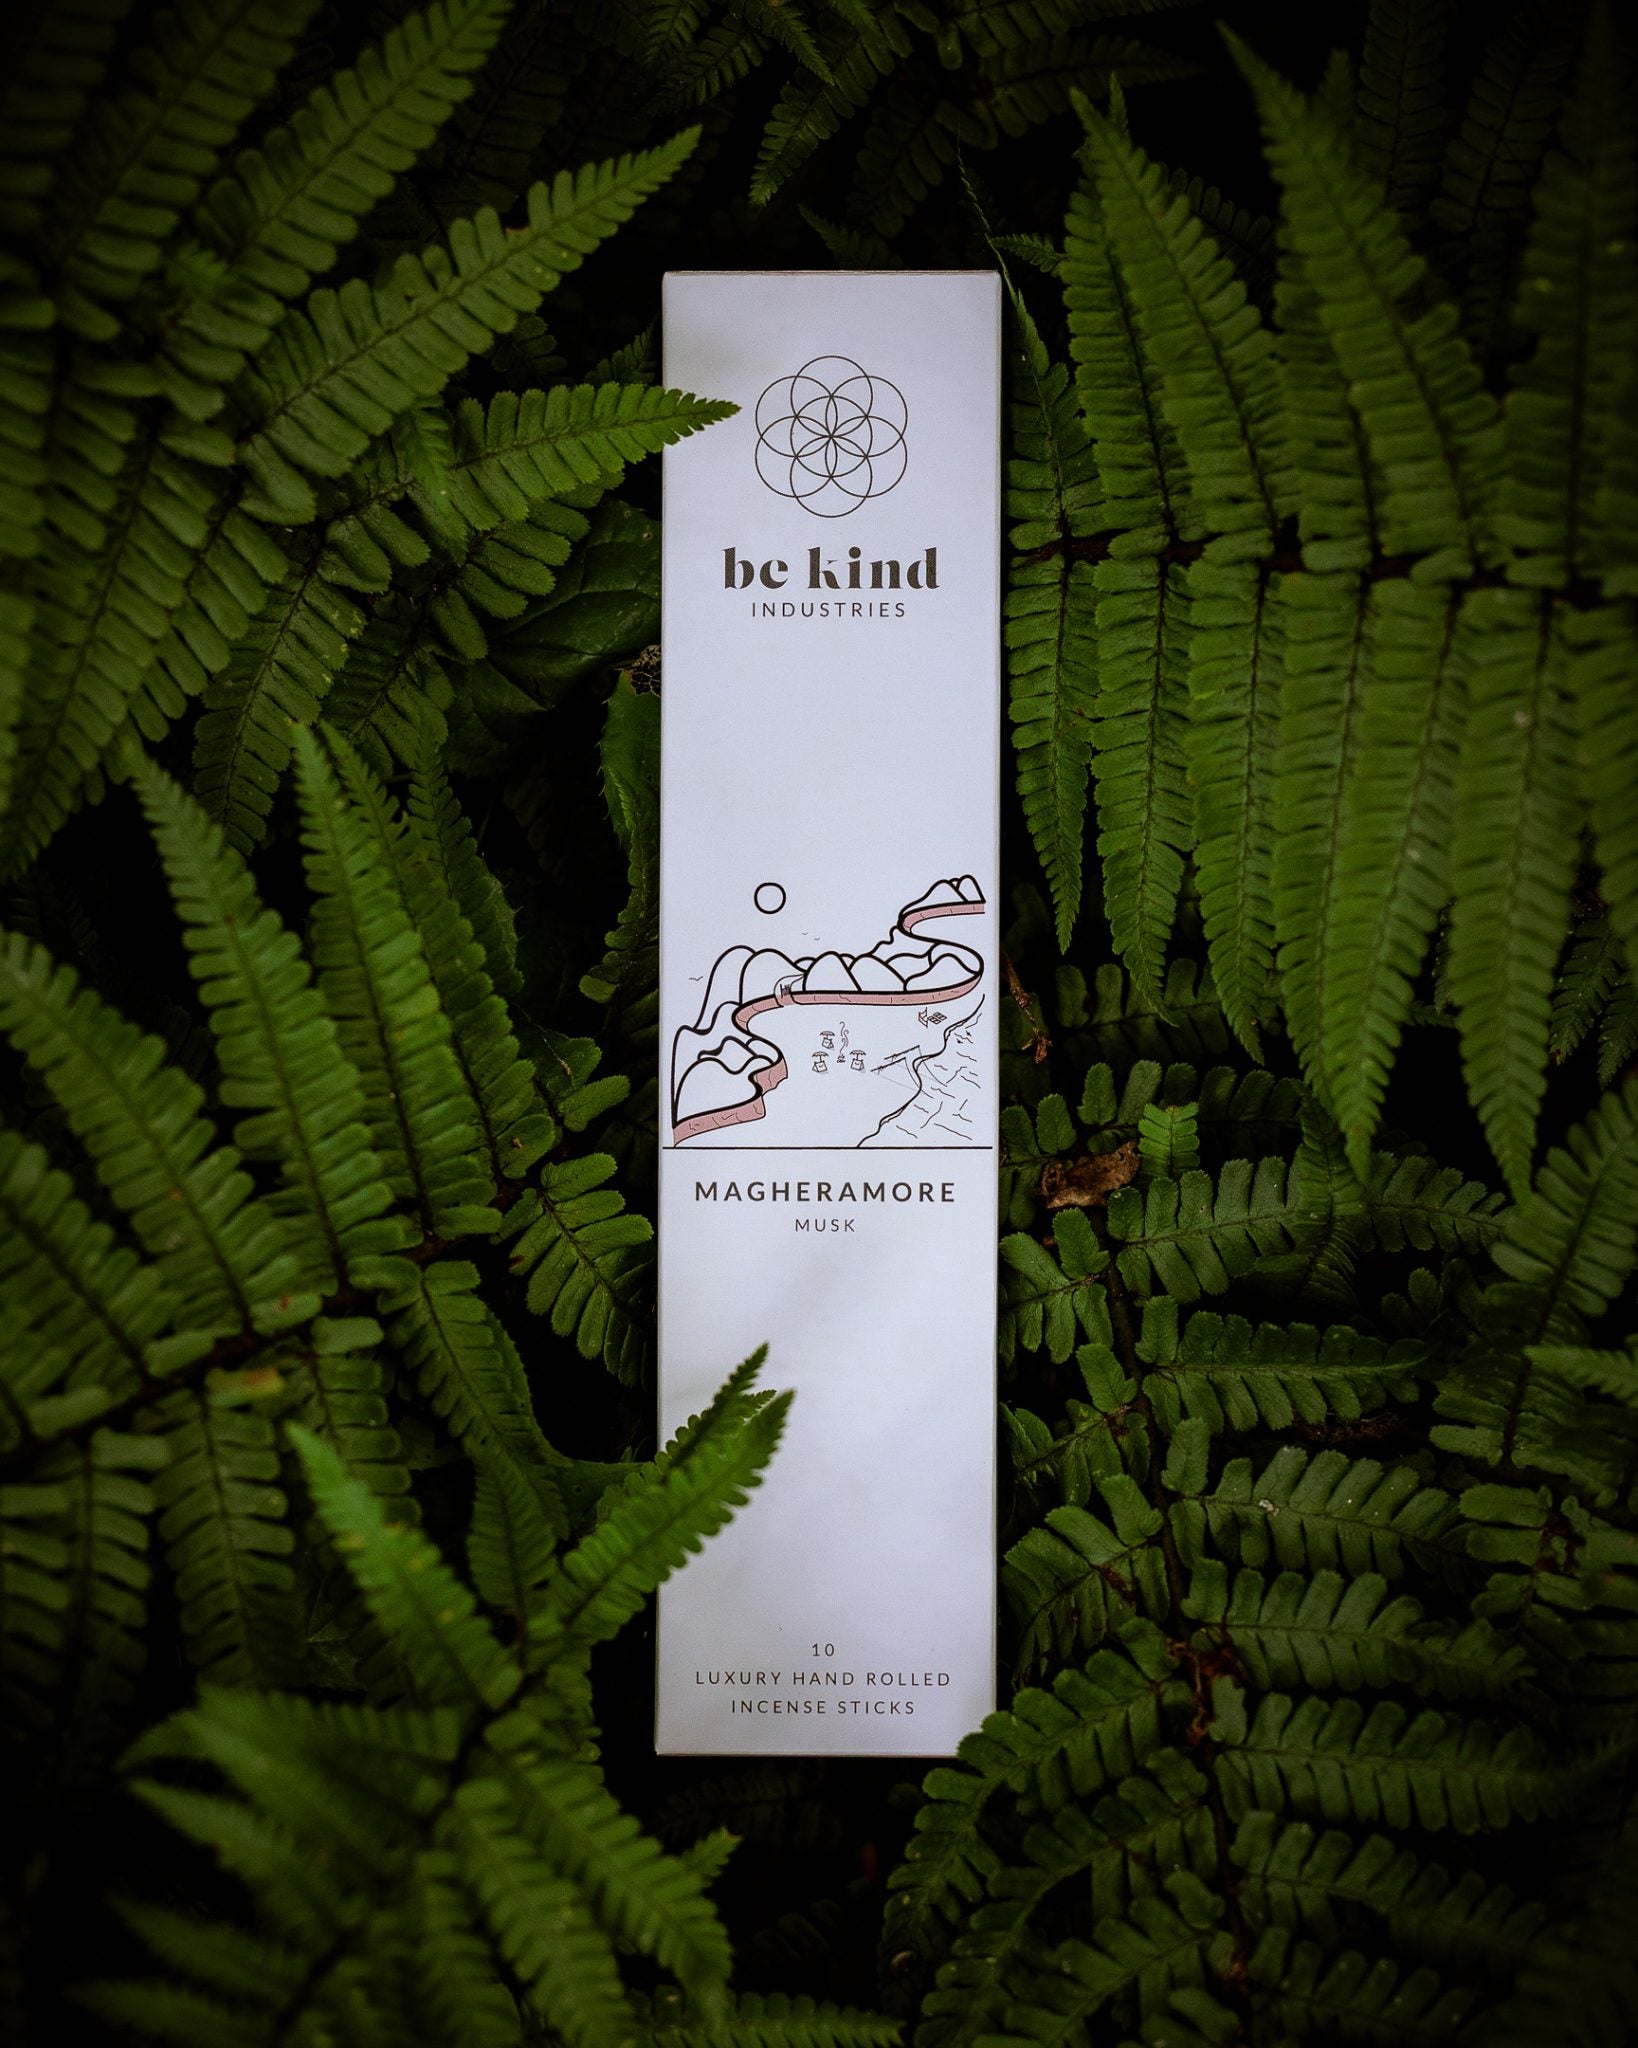 Be Kind Incense Sticks Luxury Hand Rolled (10) Magheramore Musk